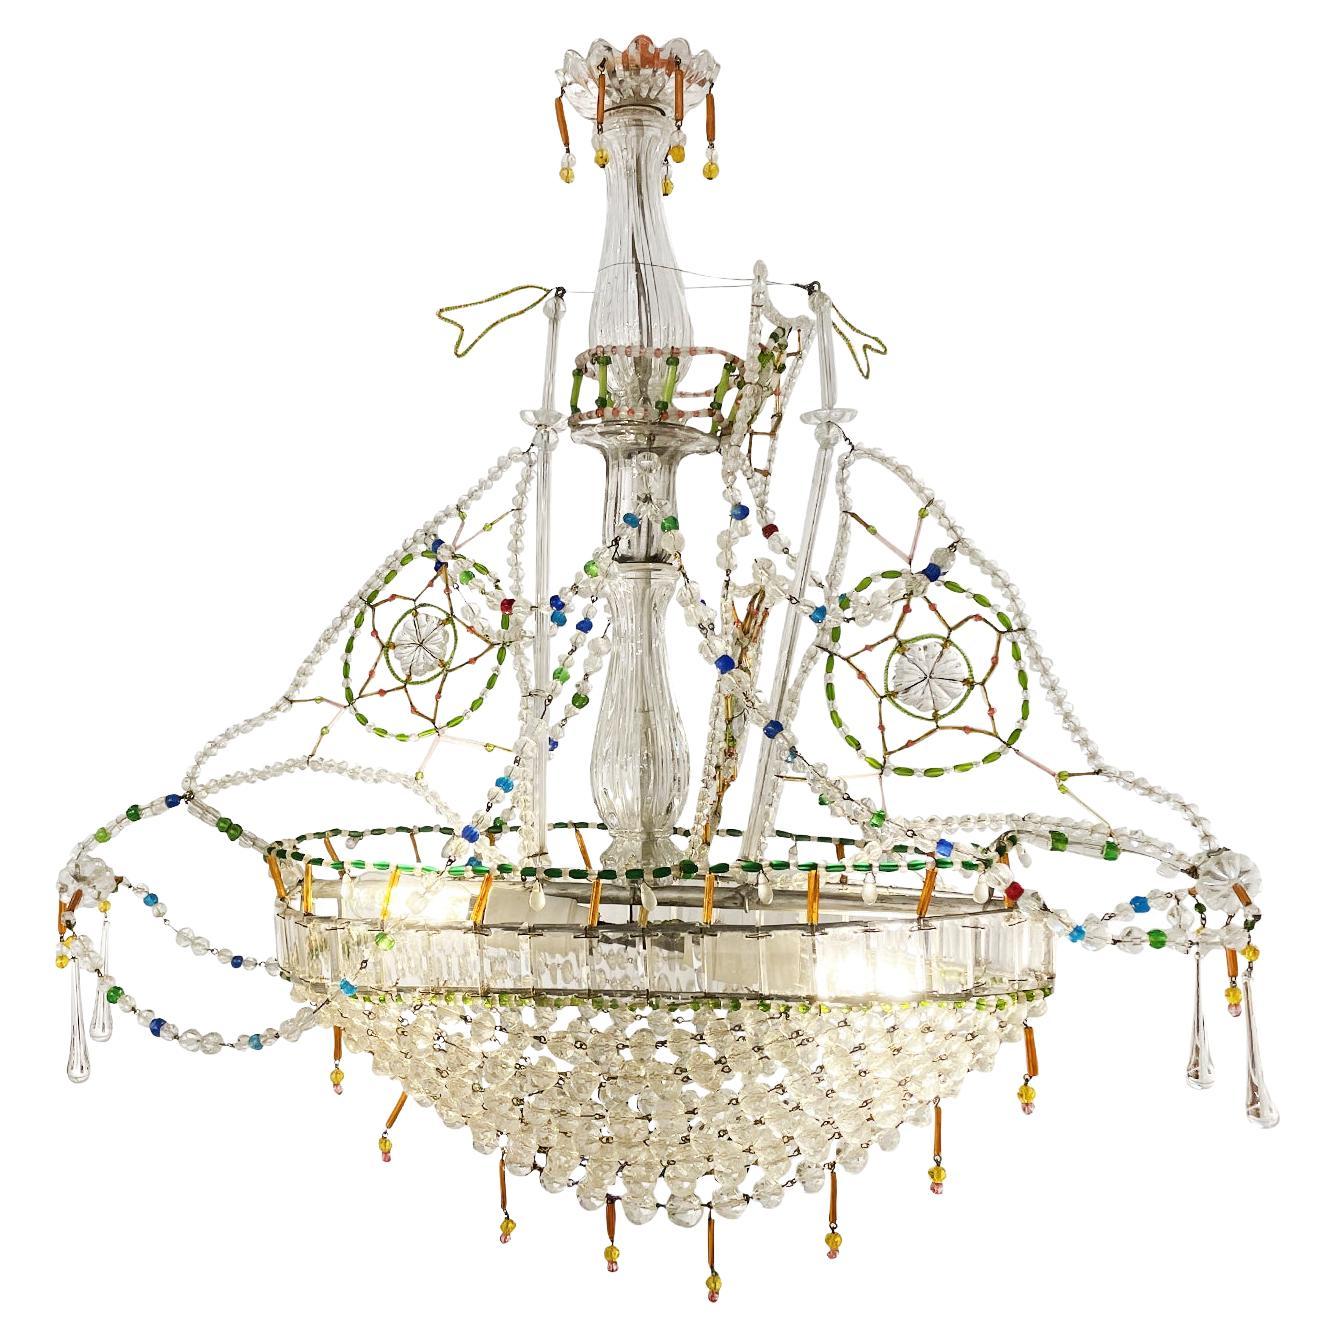 20th Century French Crystal Glass Sail Ship Boat Pendant - Vintage Ceiling Light For Sale